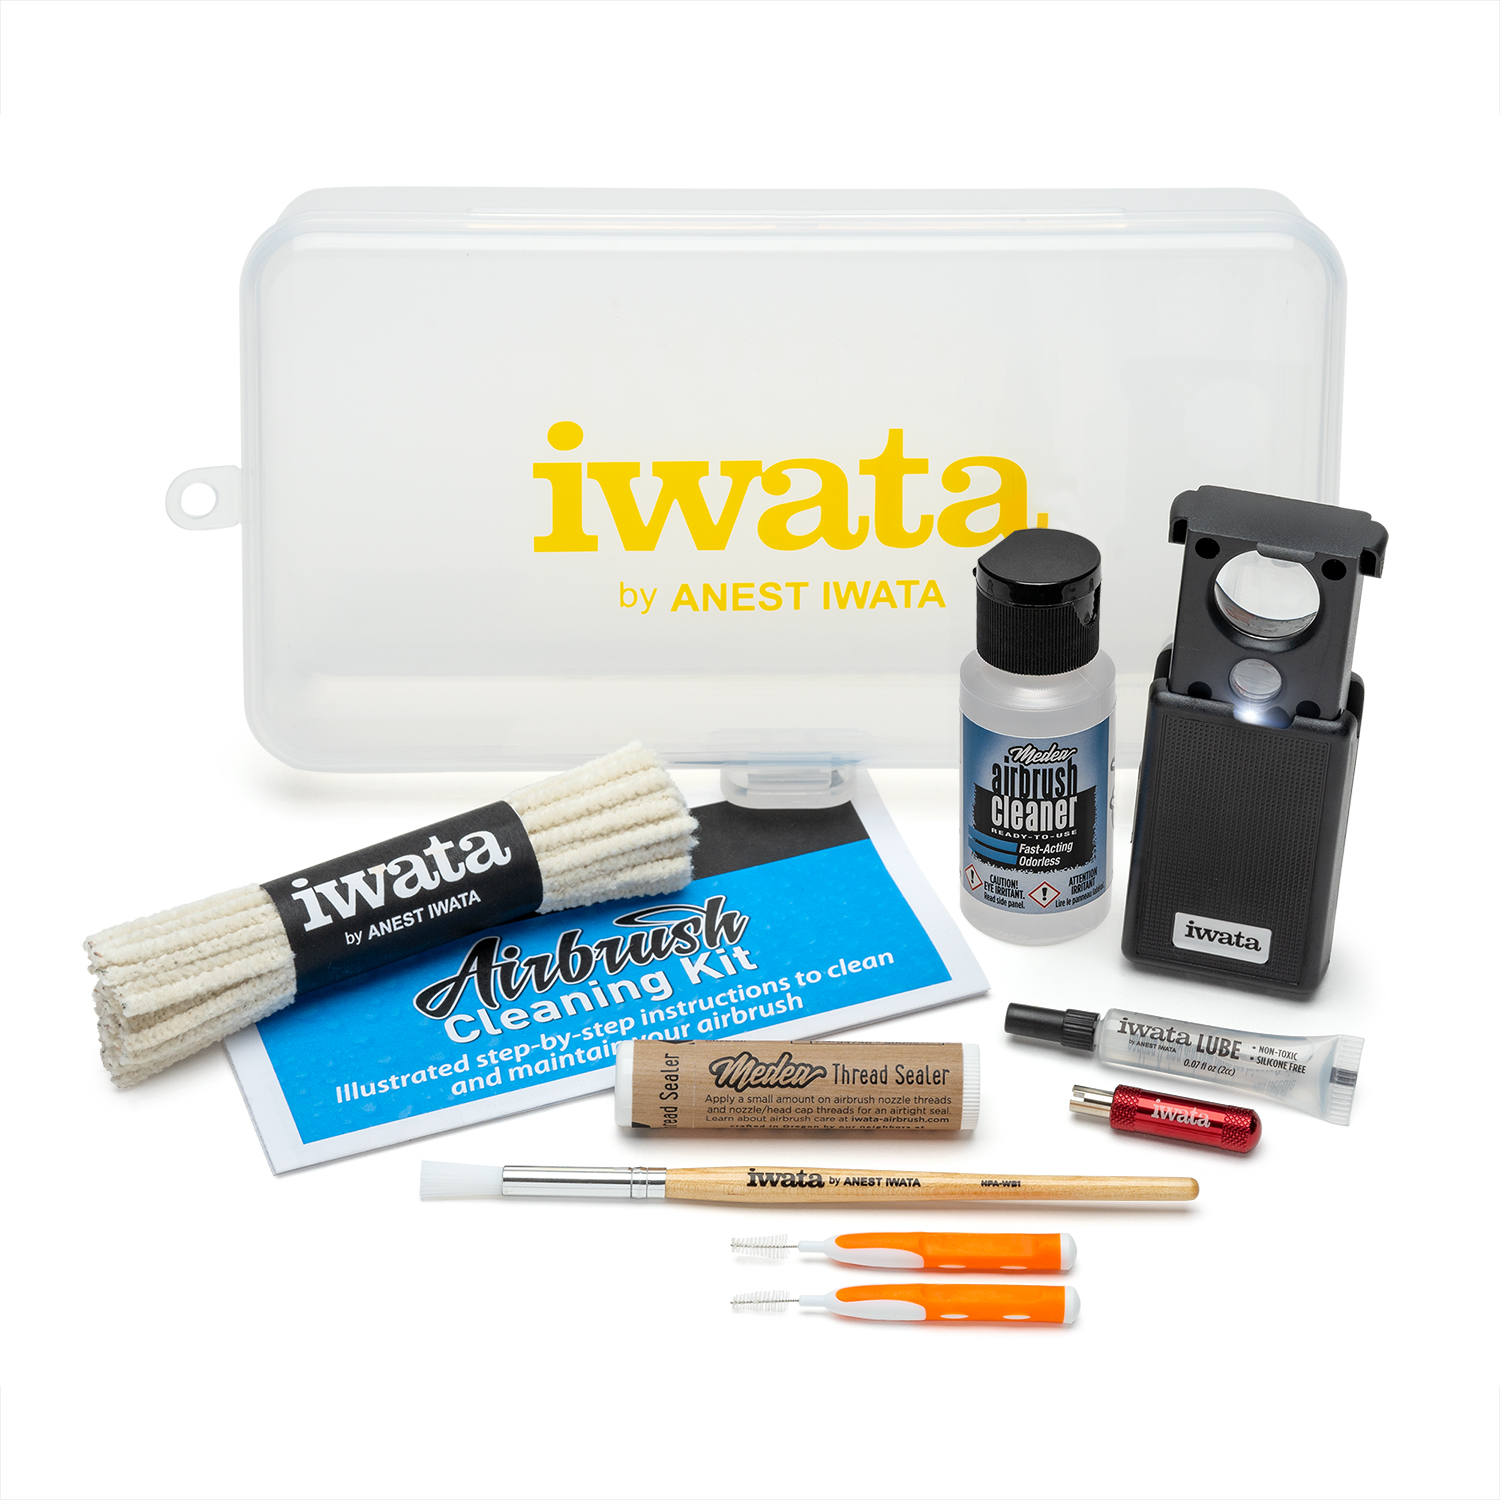 Iwata® Airbrush Cleaning Station With 10 Brushes and Fume-Free Pot.